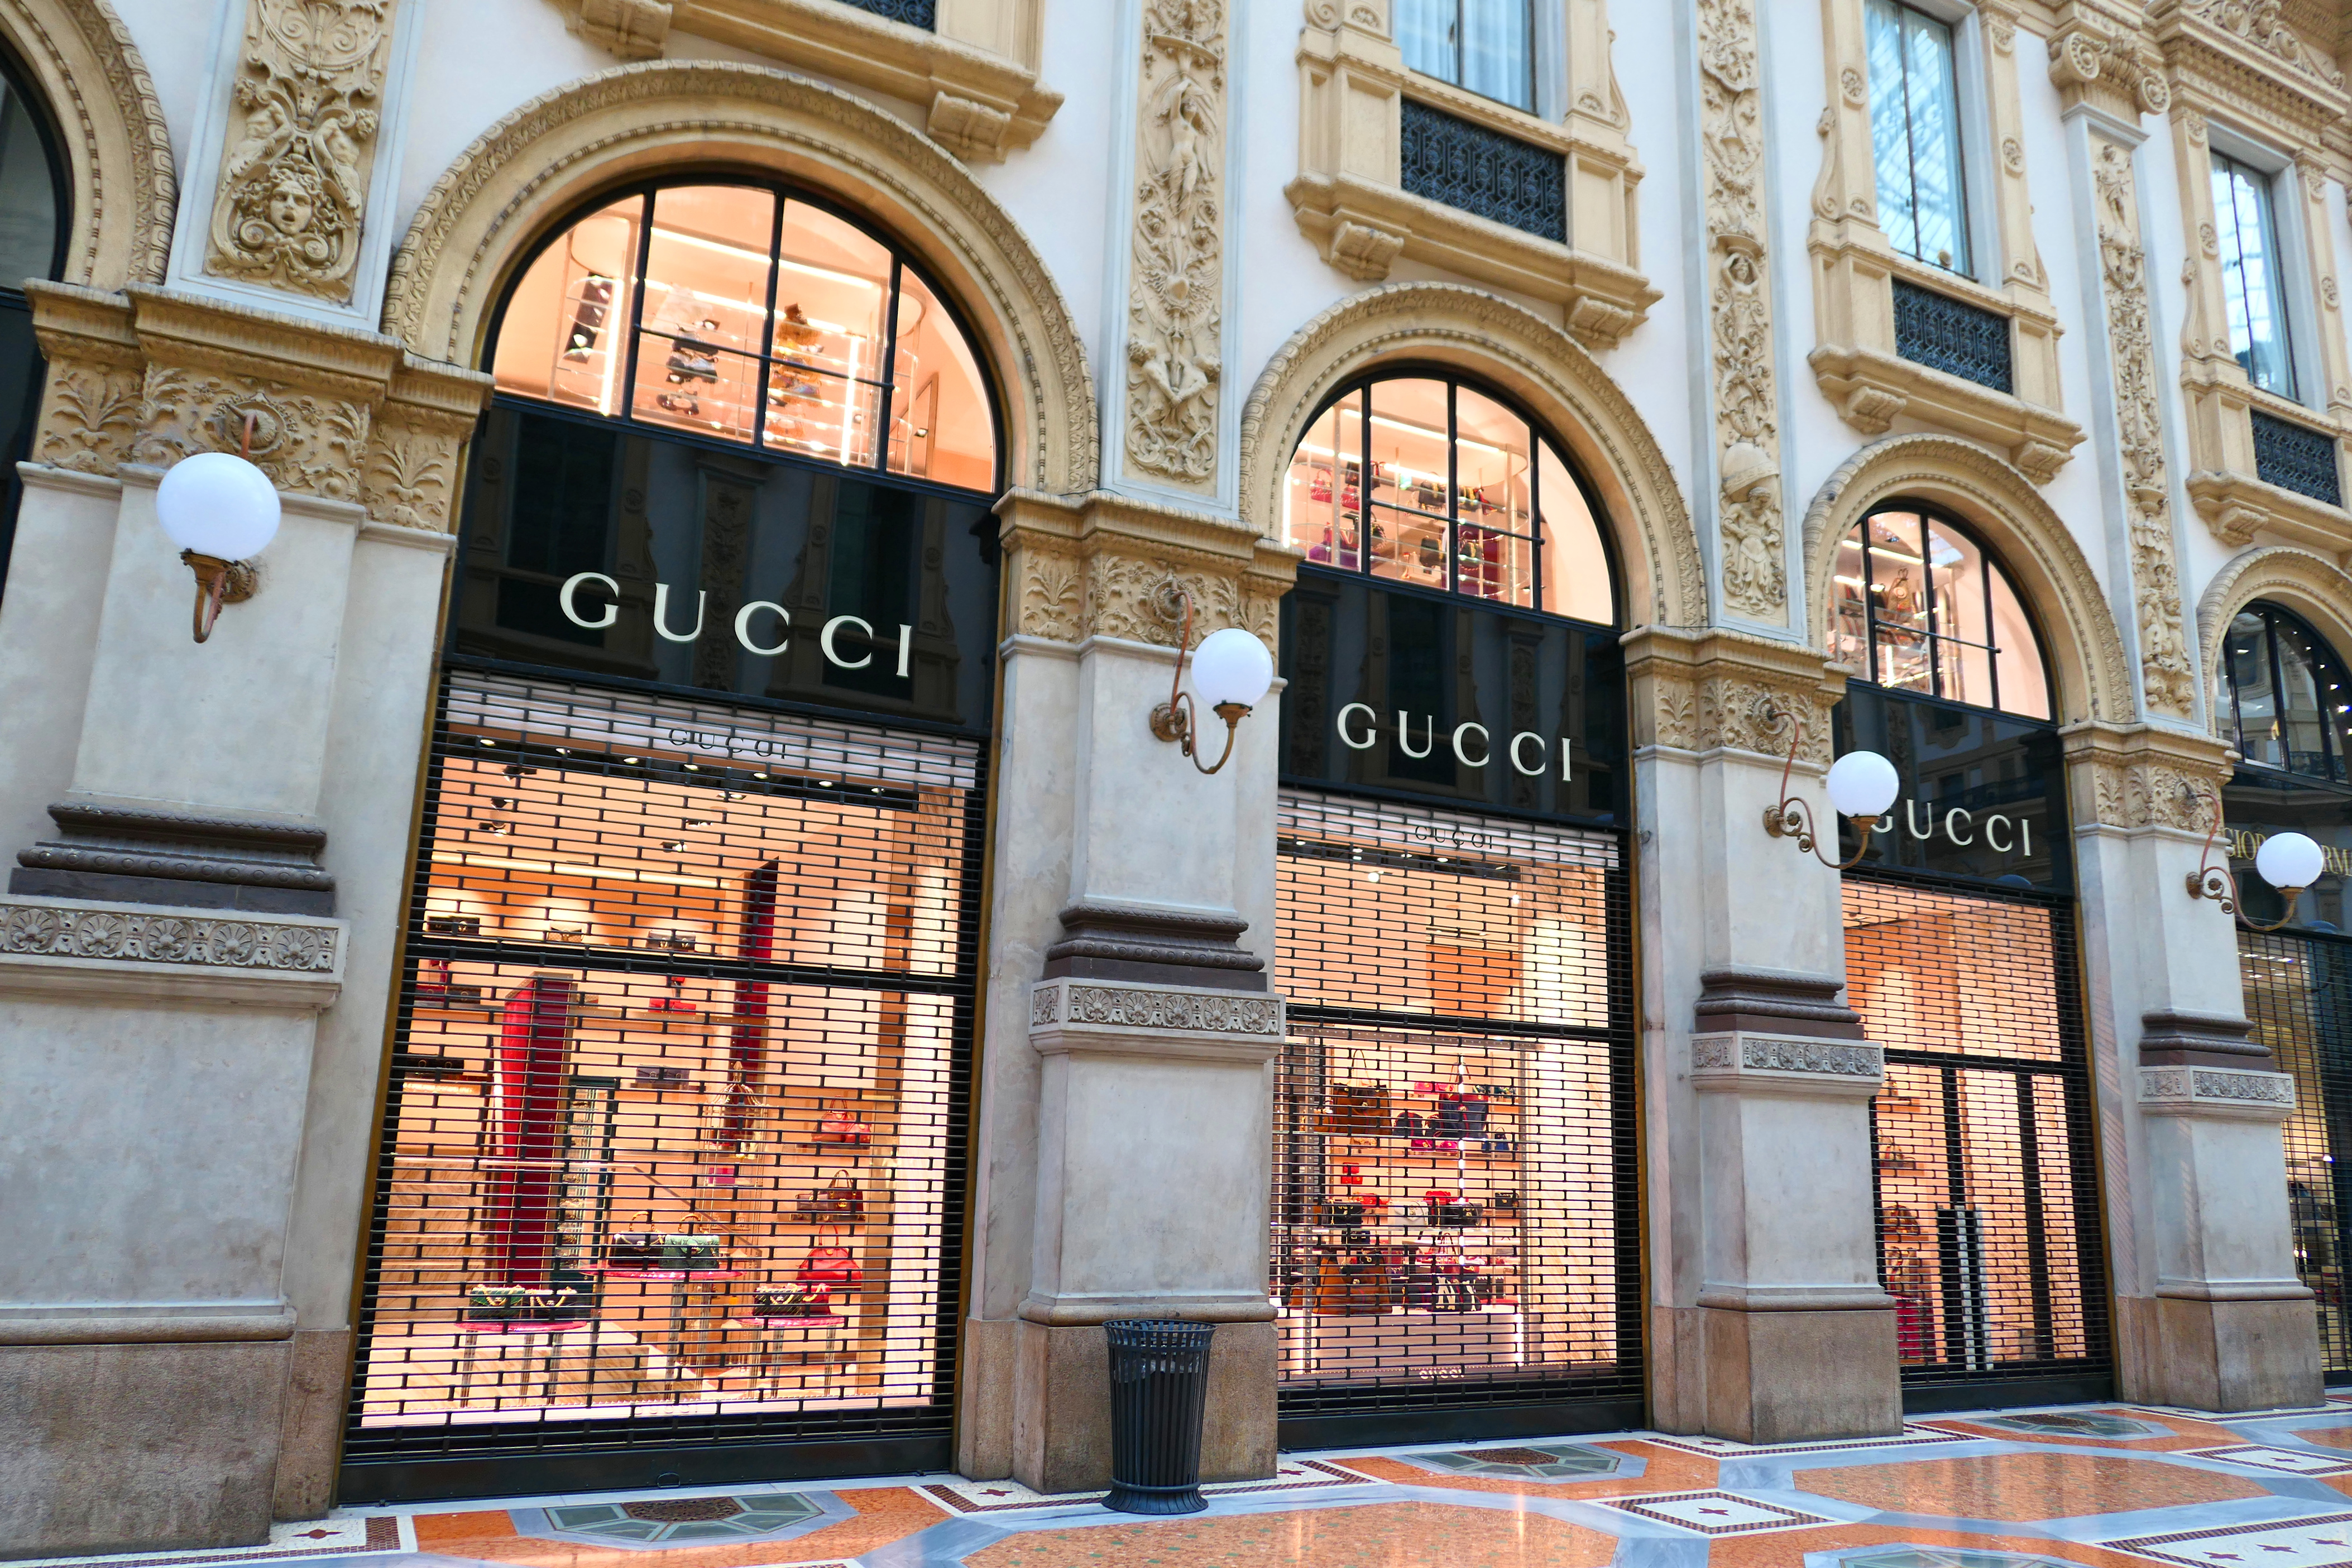 Gucci under investigation for possible violation of EU free competition  rules, Economy and Business